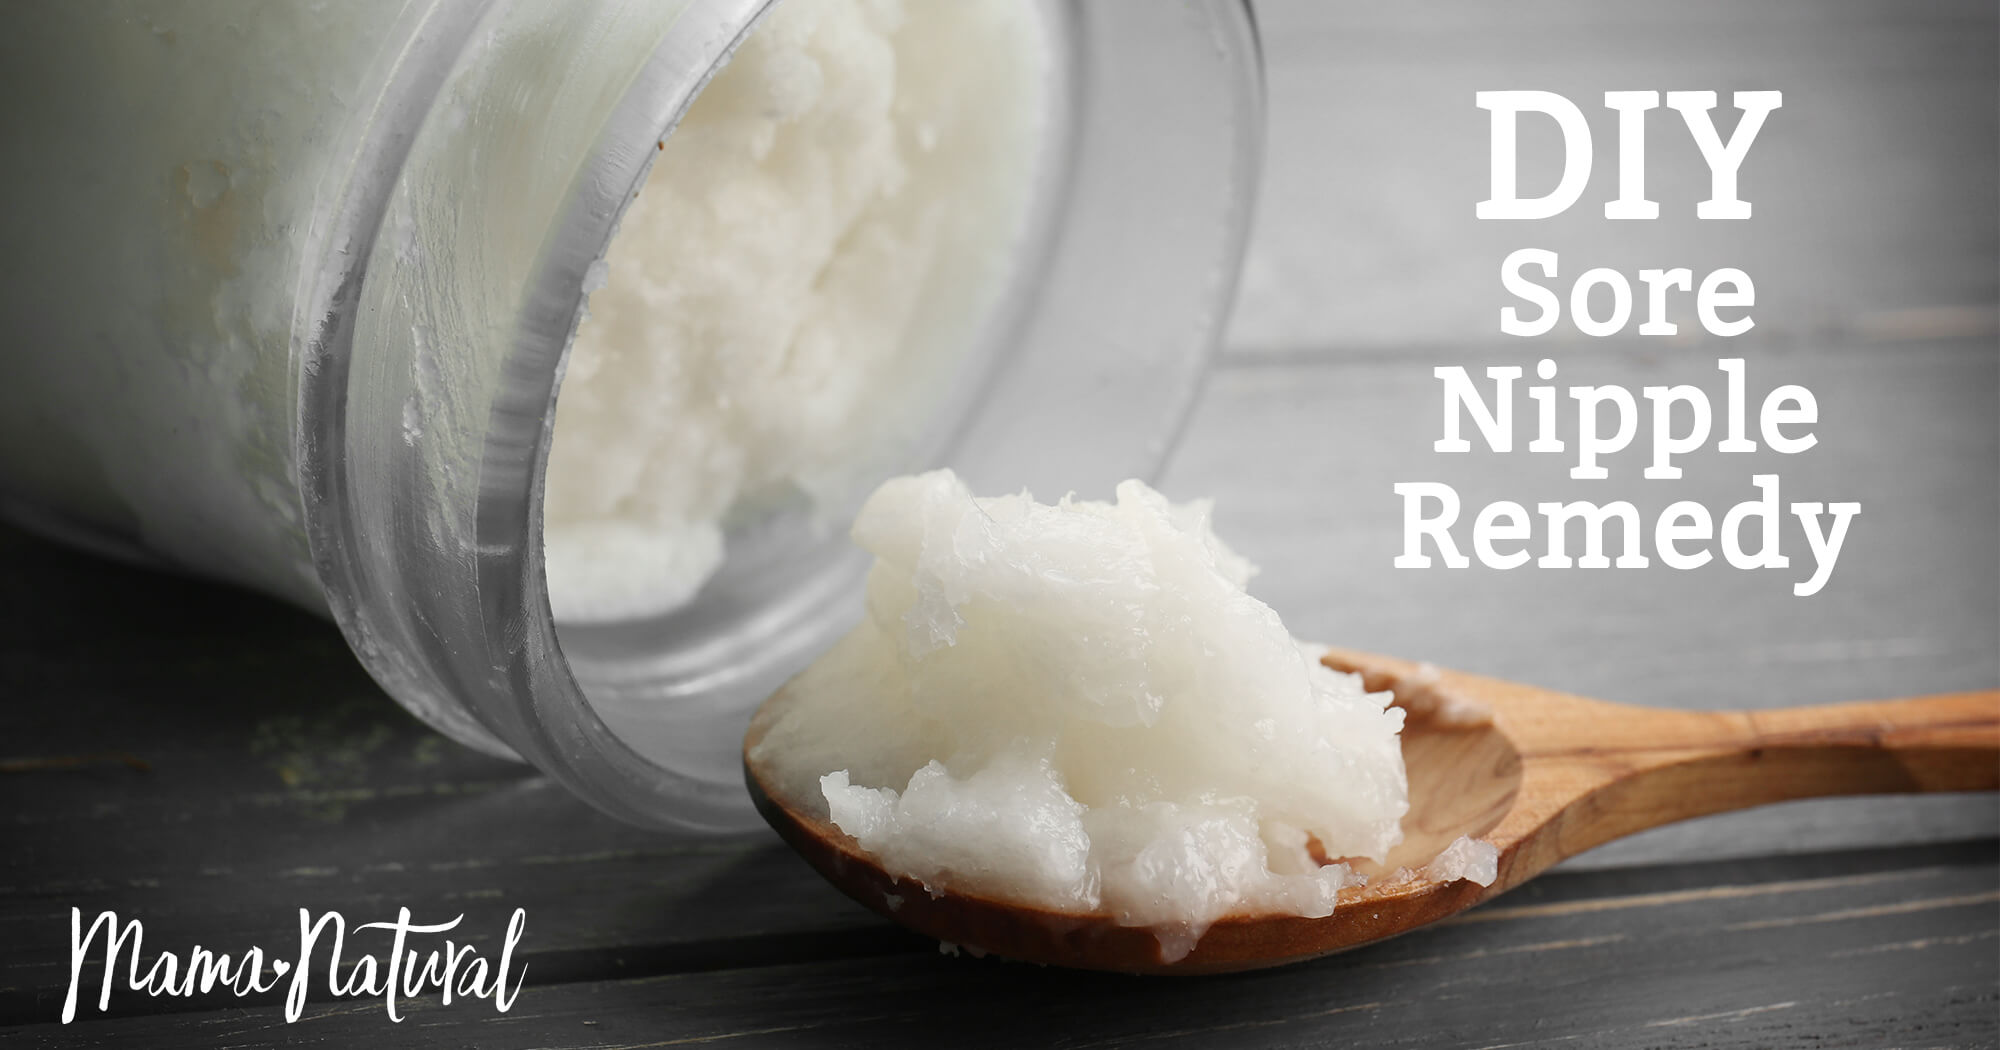 15 Home Remedies for Sore cracked Nipples from Breastfeeding